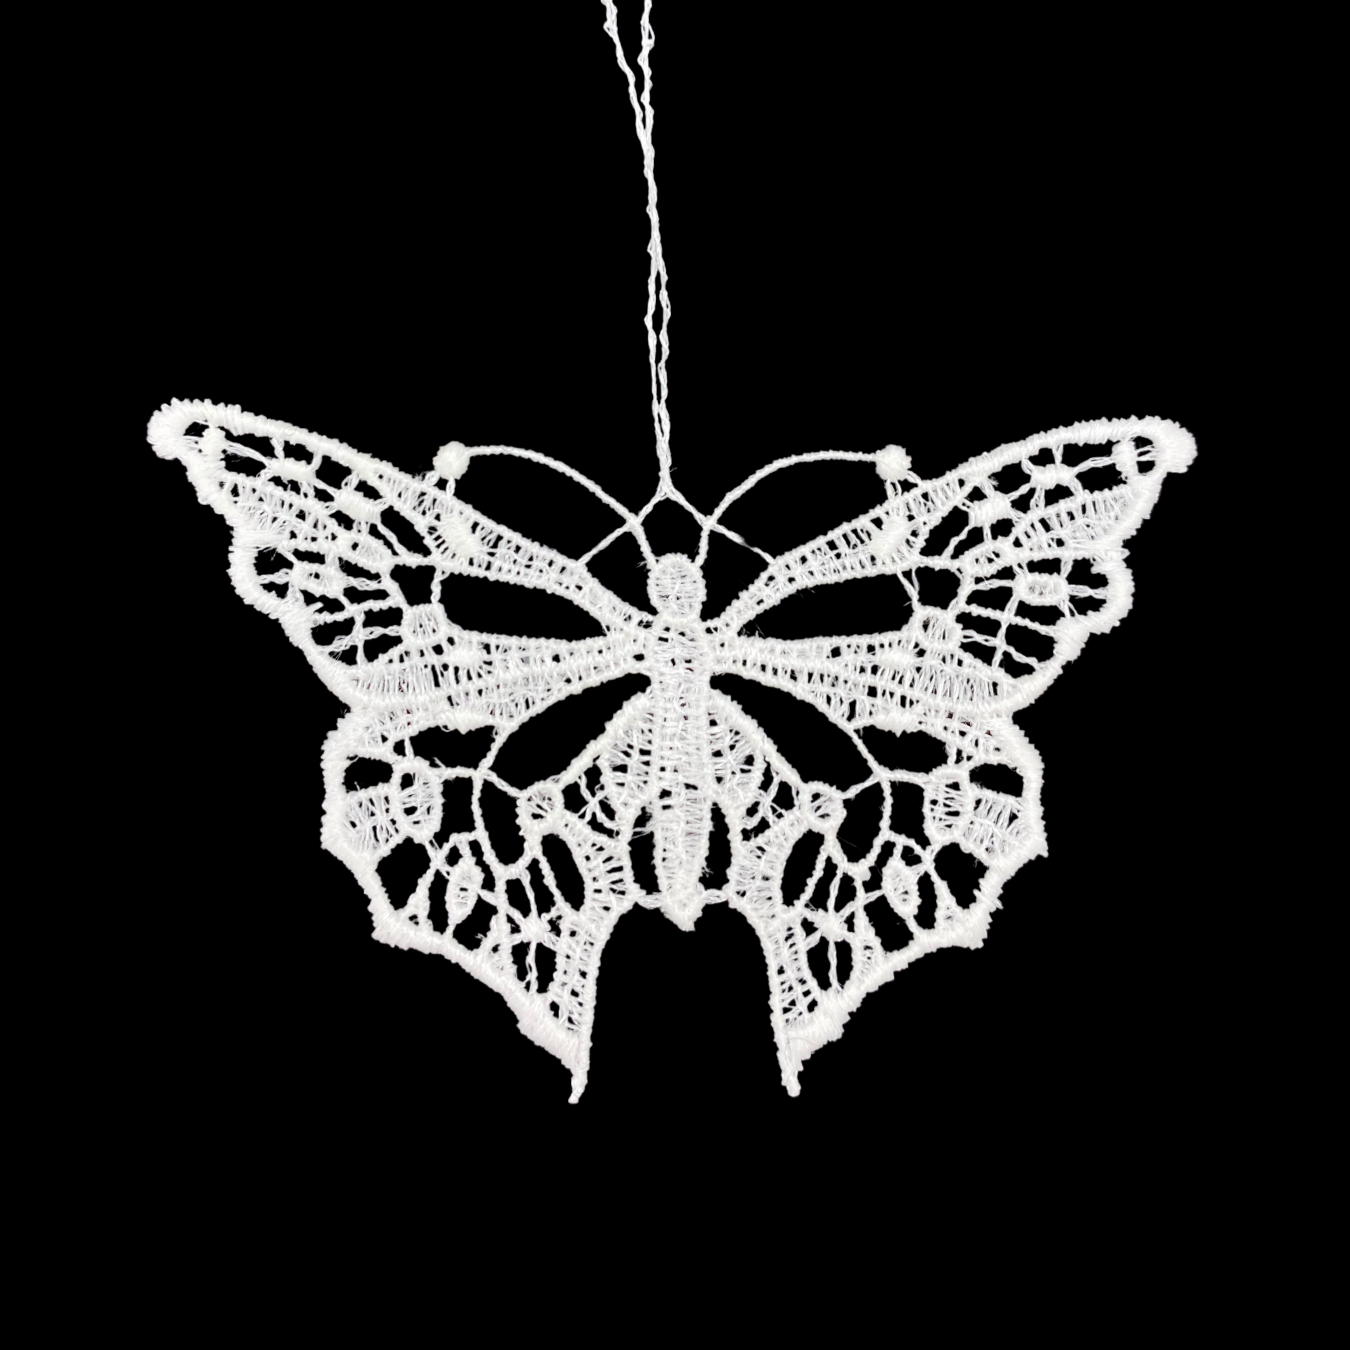 Lace Butterfly one Ornament by StiVoTex Vogel